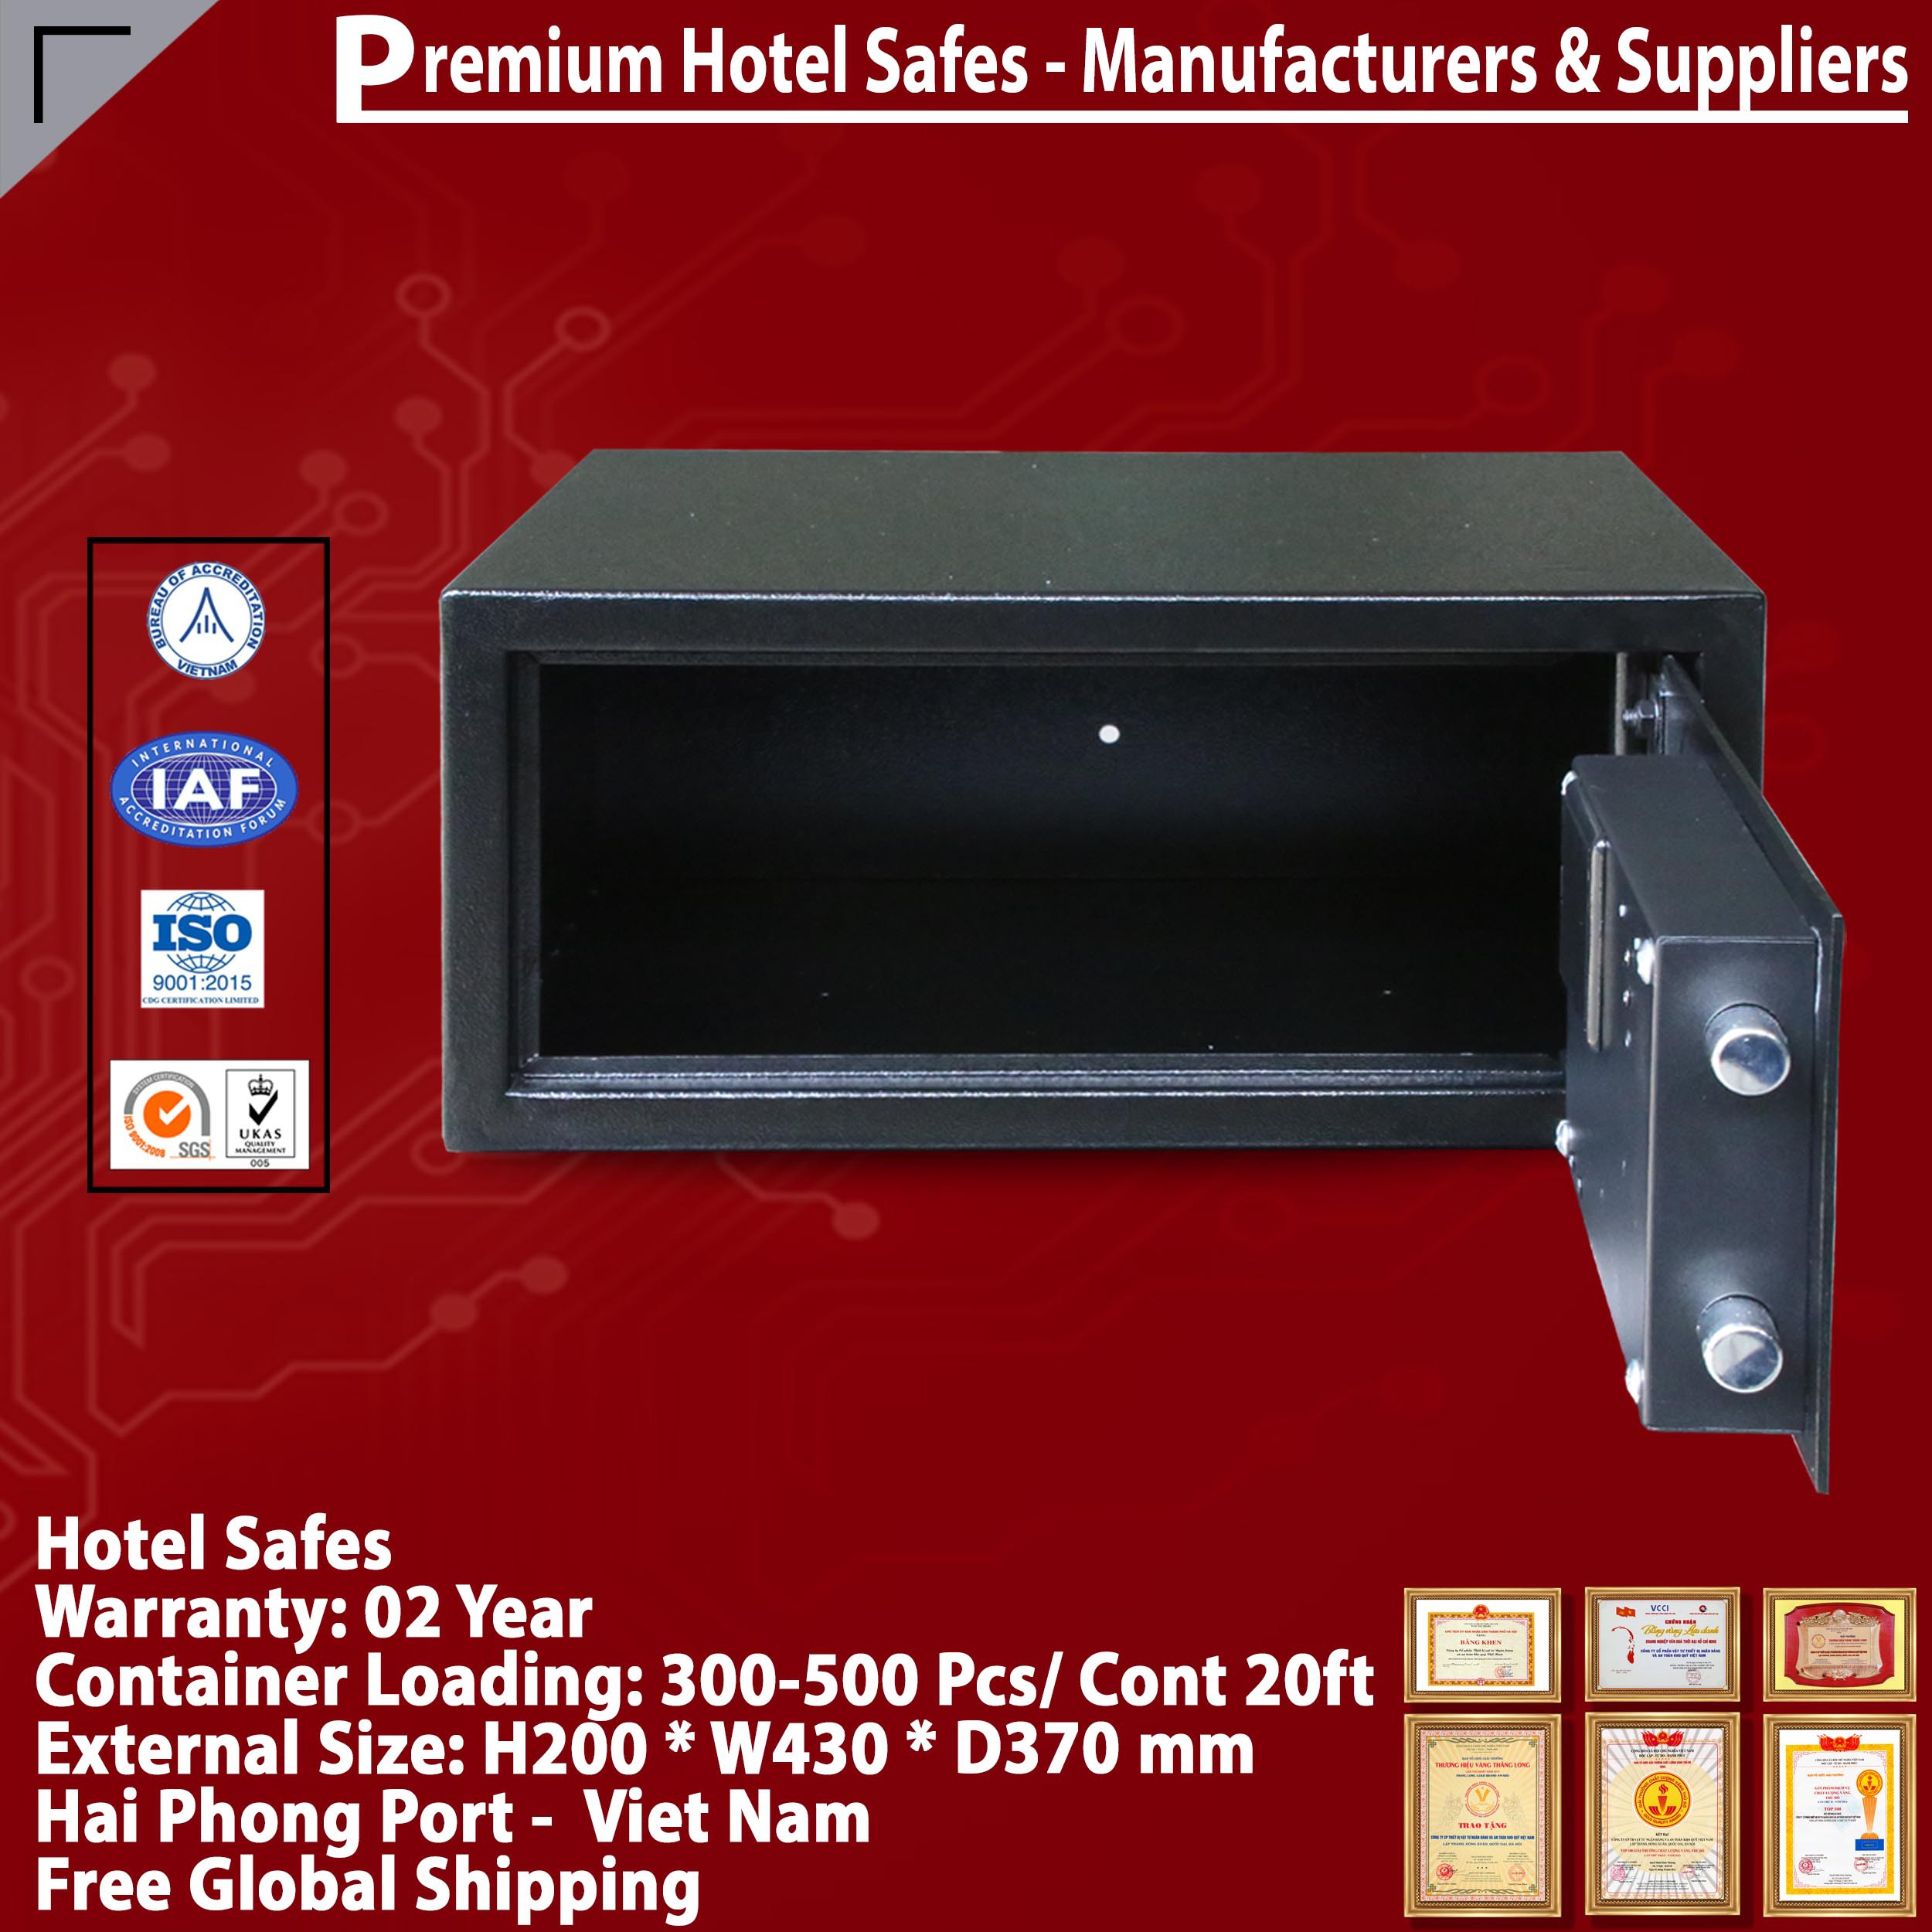 Safes in Hotel Made In Viet Nam